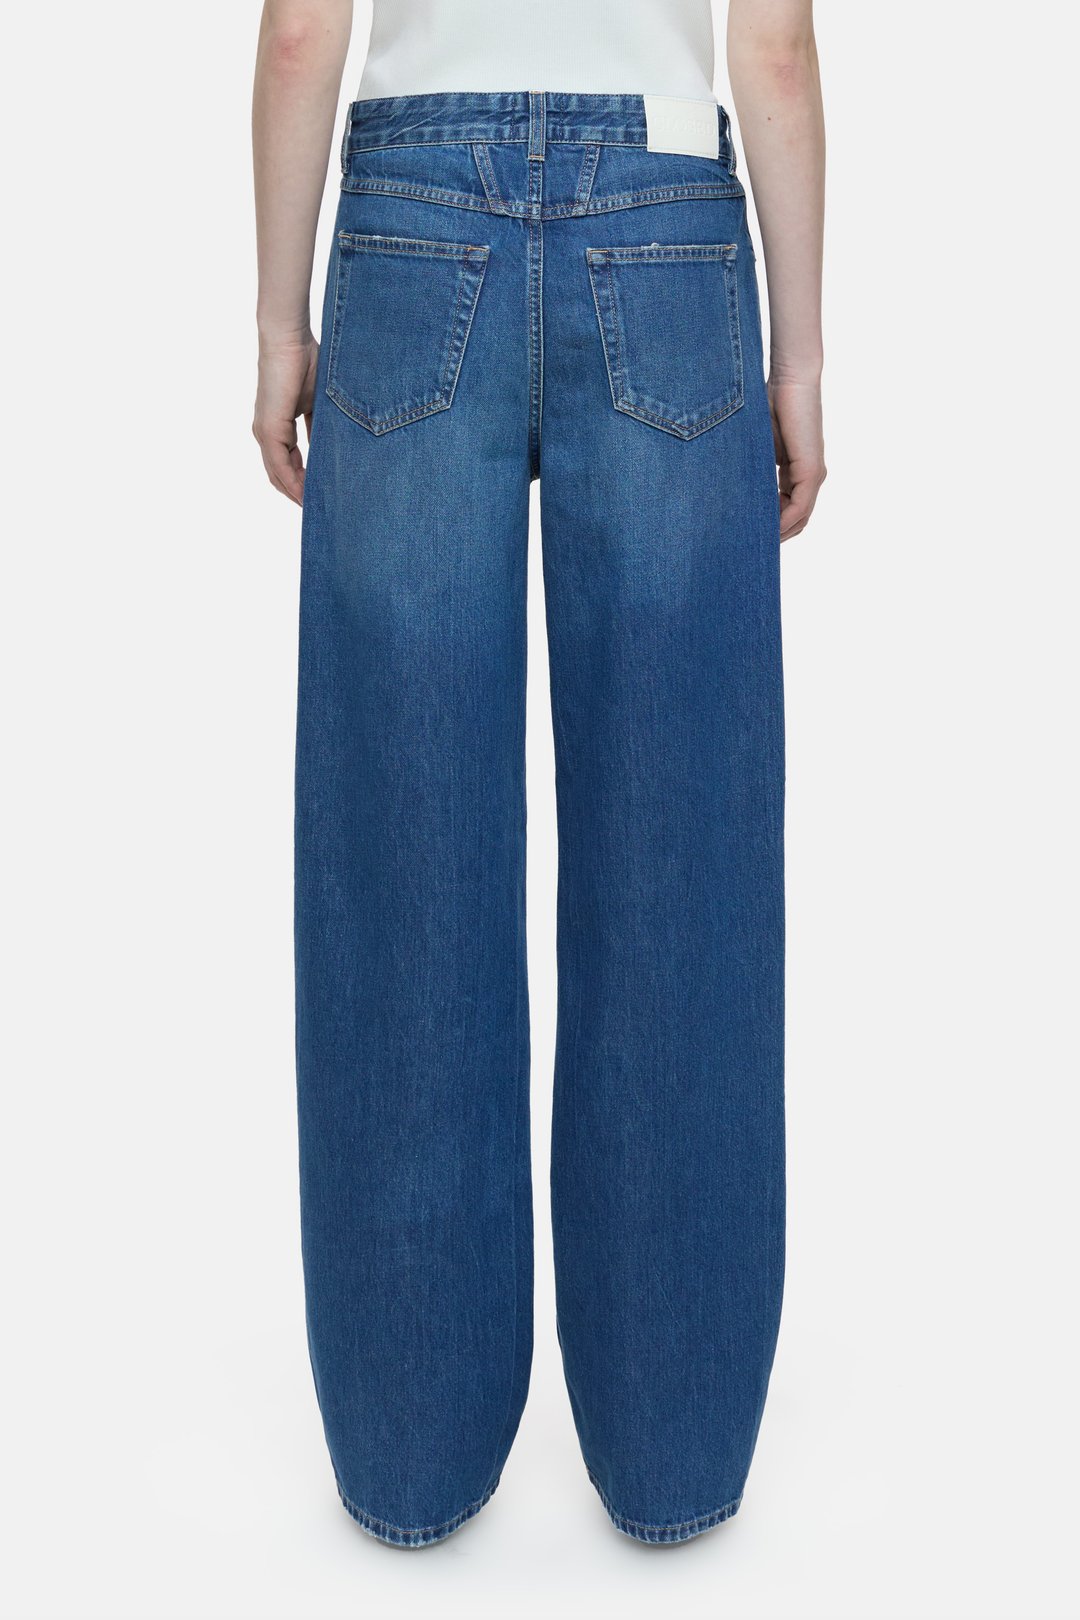 CLOSED NIKKA - WIDE JEANS - MID BLUE